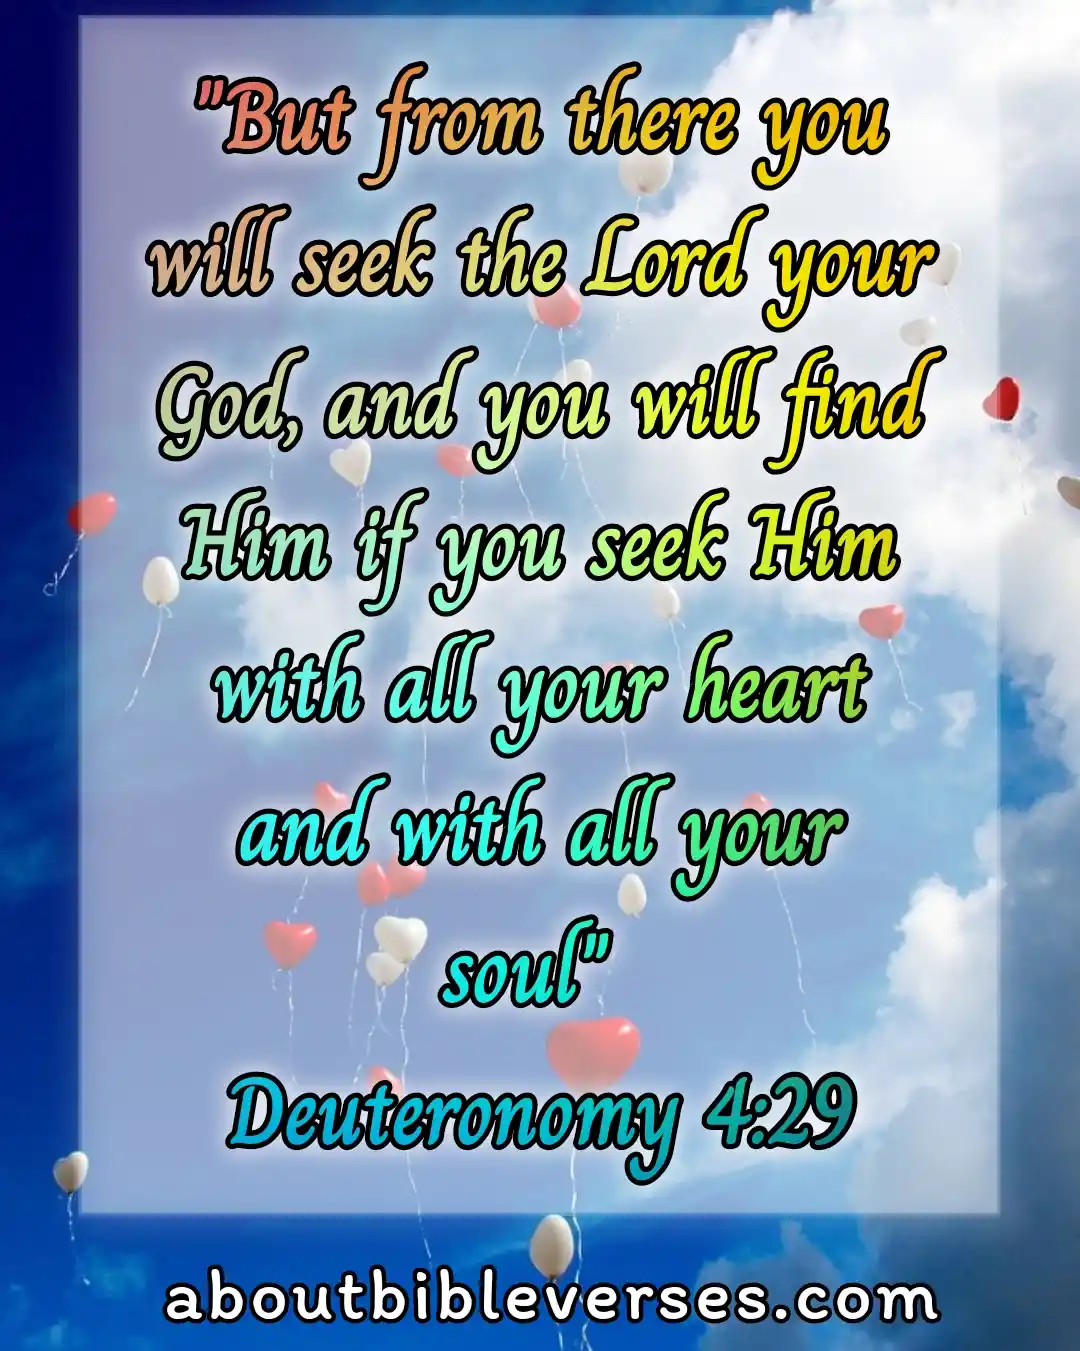 bible verses about your soul and heart (Deuteronomy 4:29)